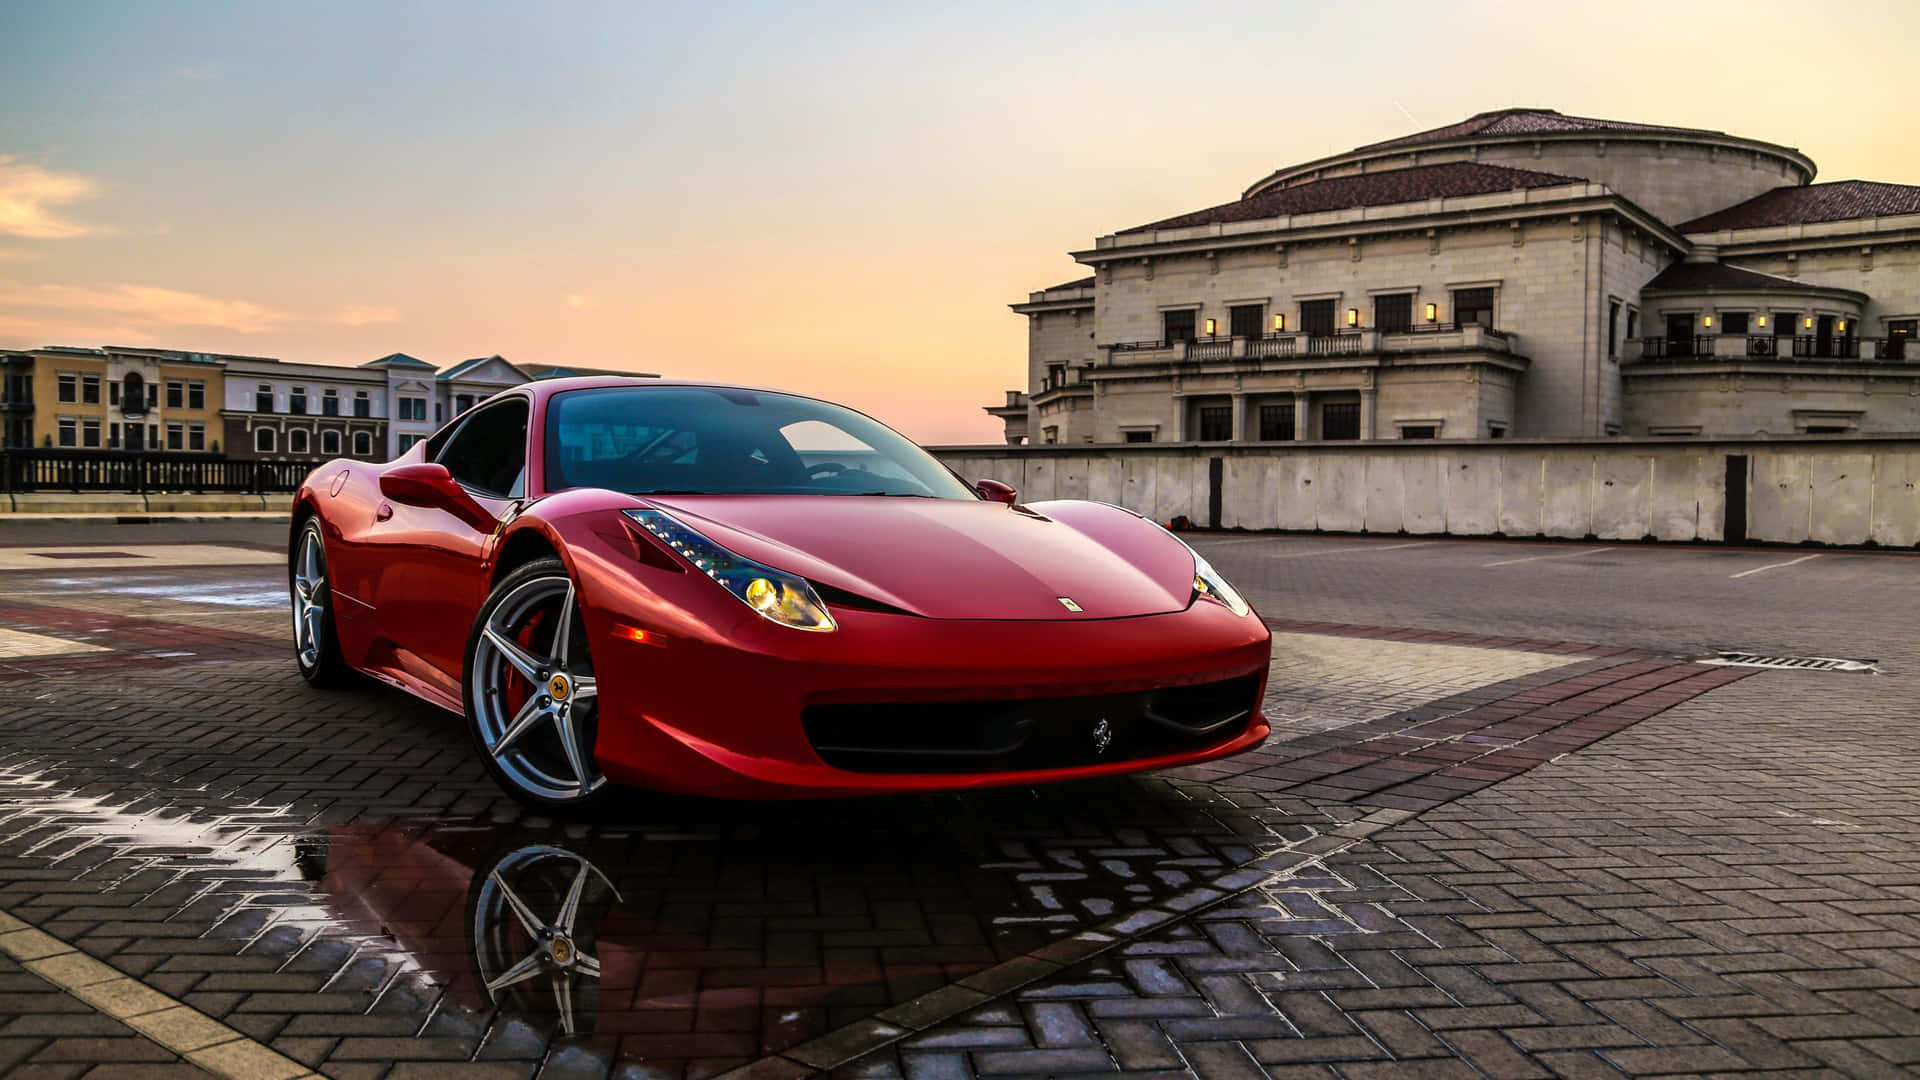 Luxurious Speed - Experience The Thrill Of A 4k Ferrari